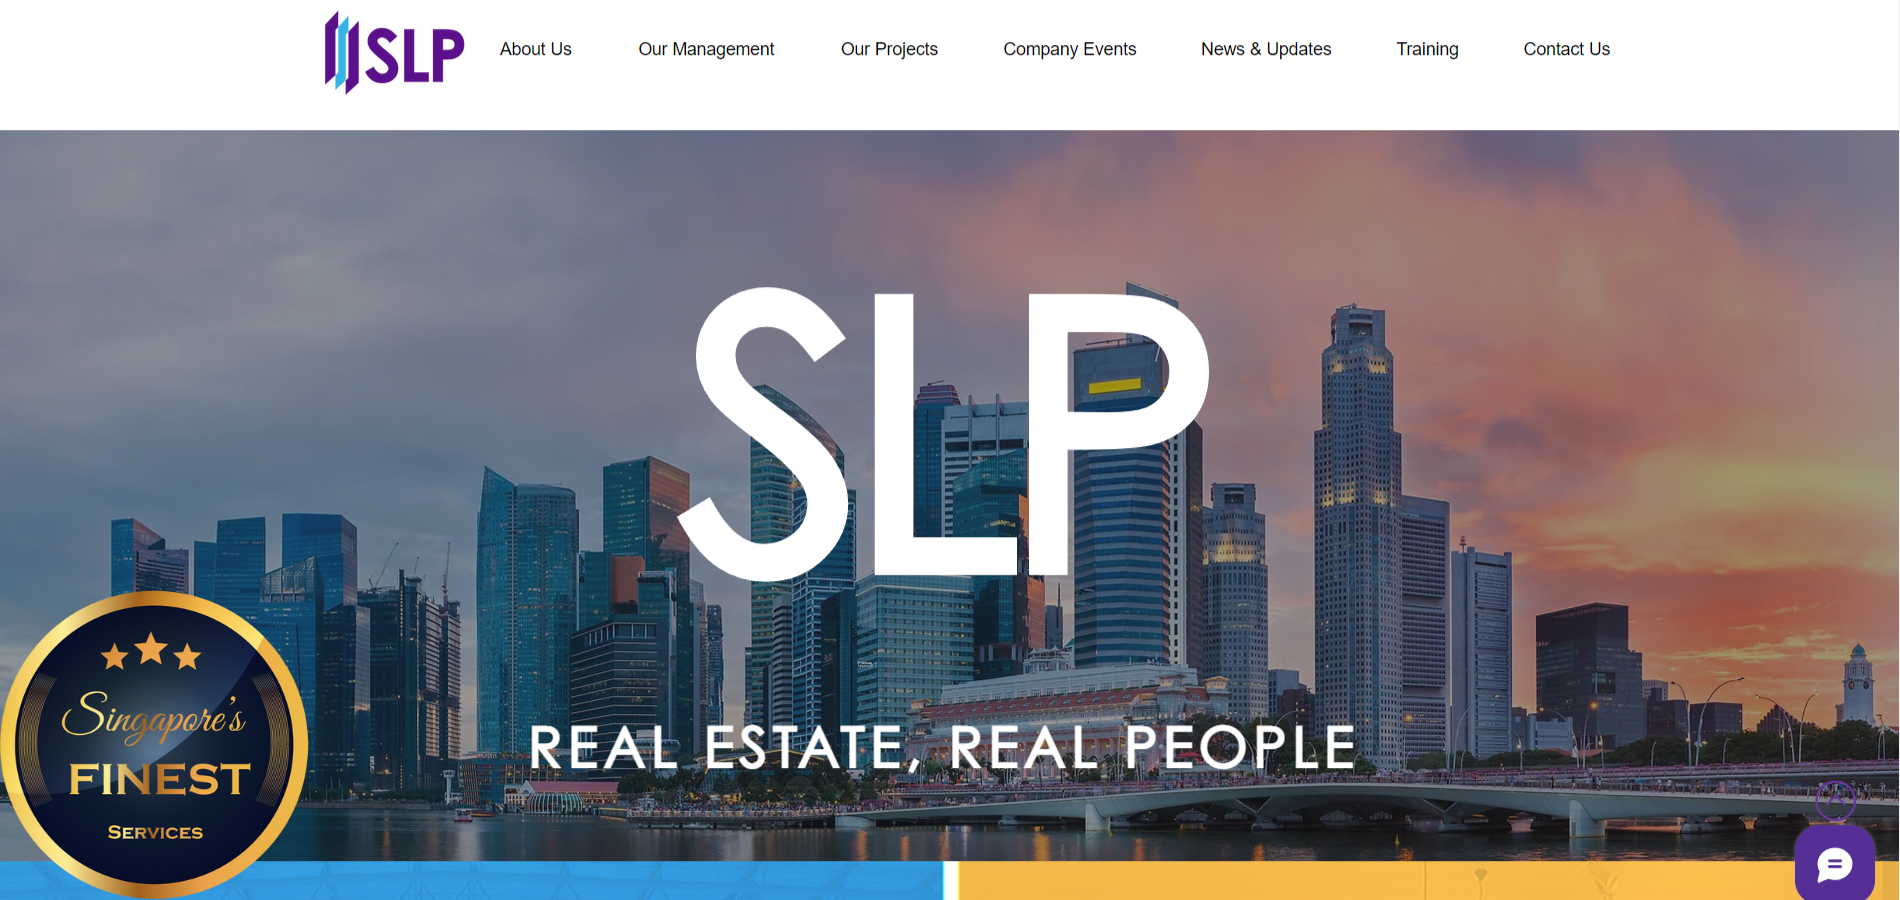 The Finest Property Company in Singapore